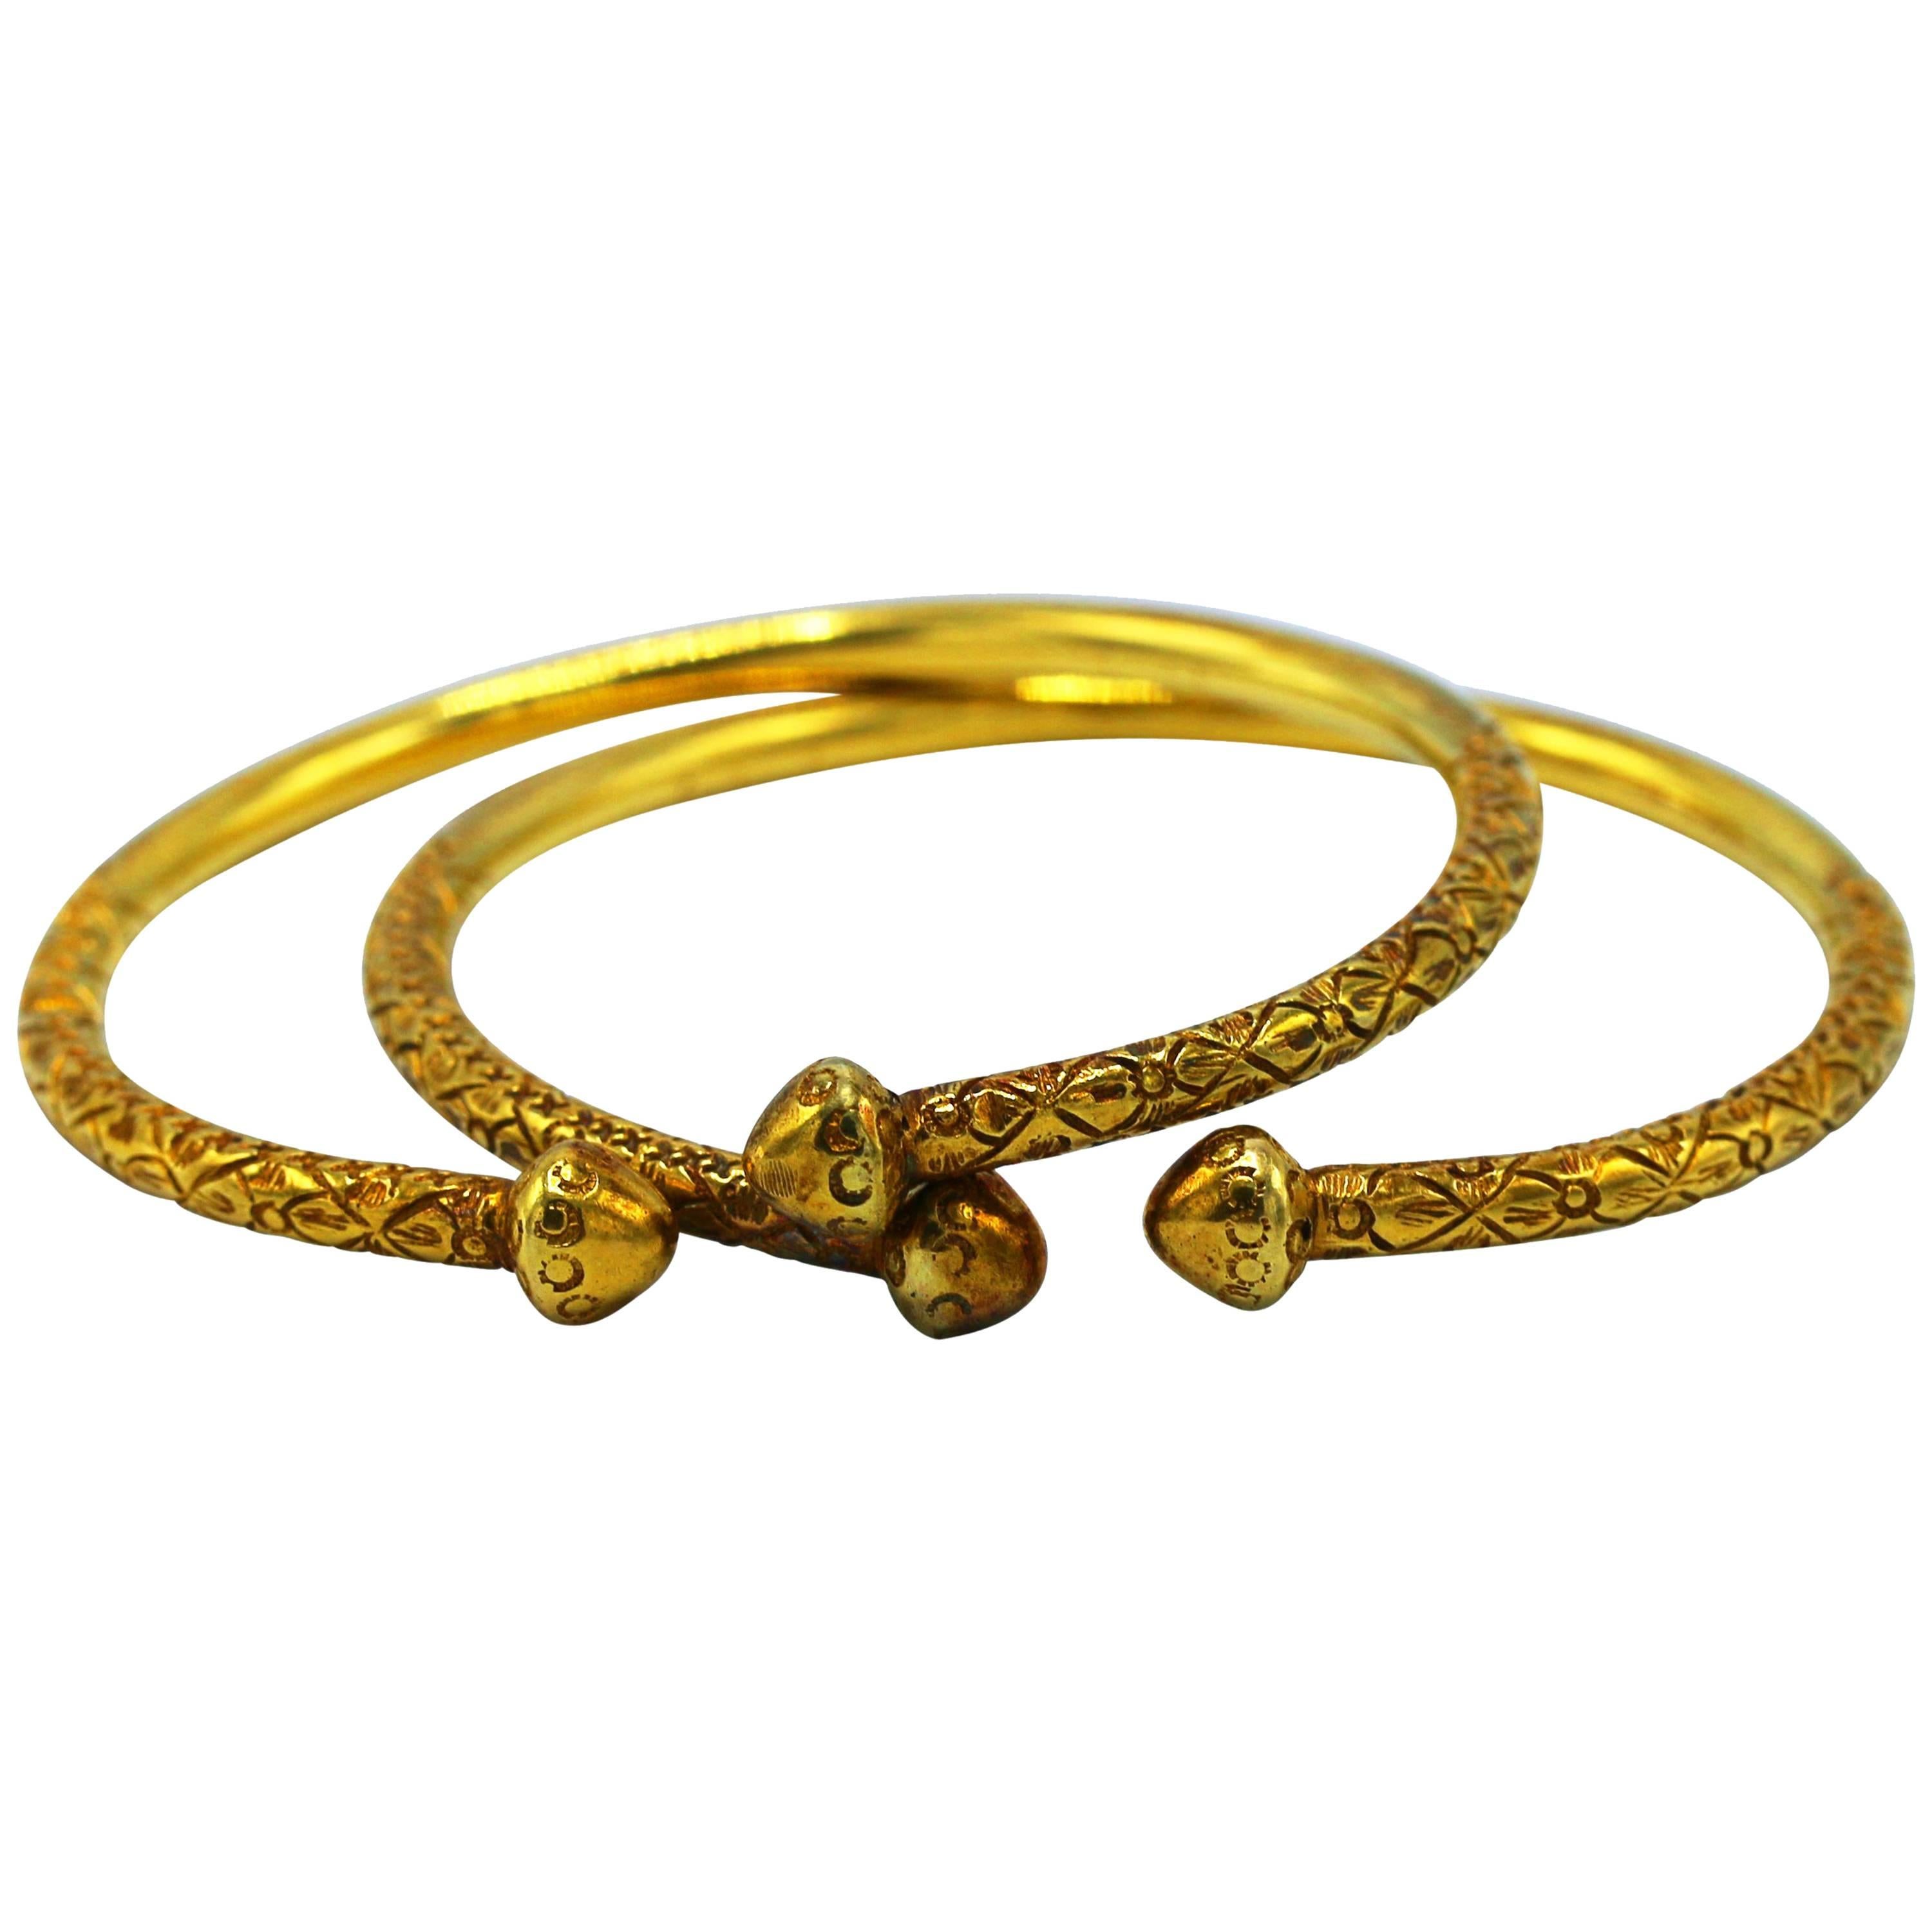 Pair of Gold Stacking Cuff Bangles